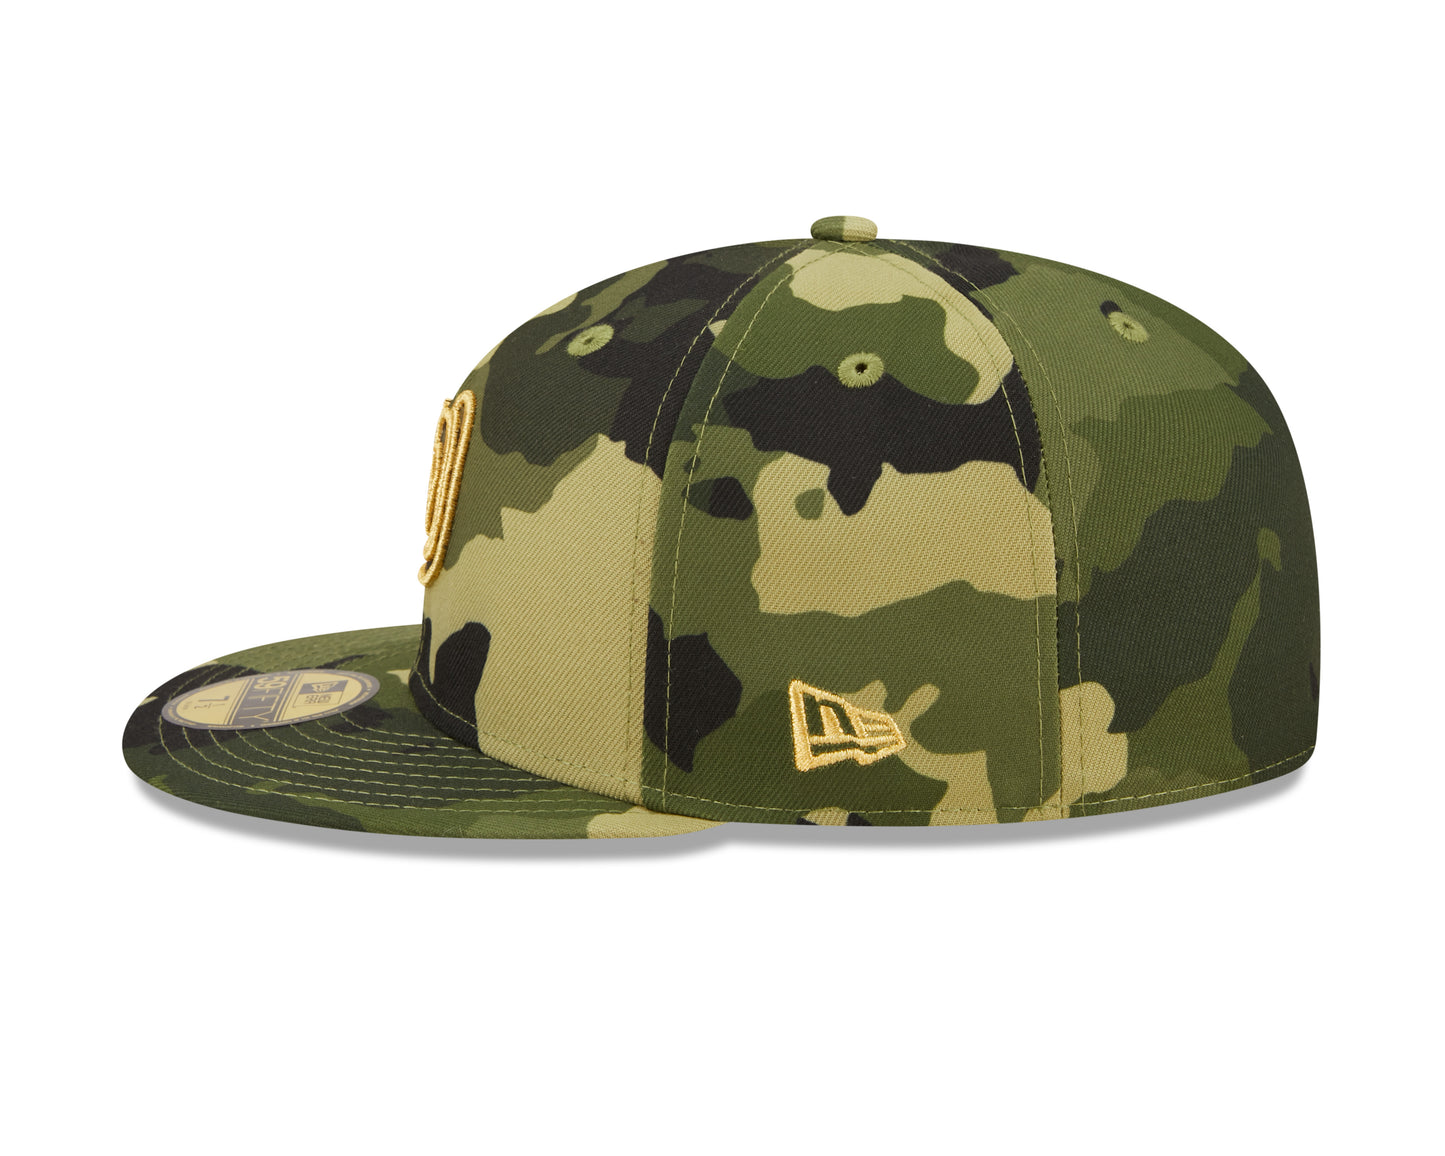 Washington Nationals New Era Camo Armed Forces On-Field 59FIFTY Fitted Hat